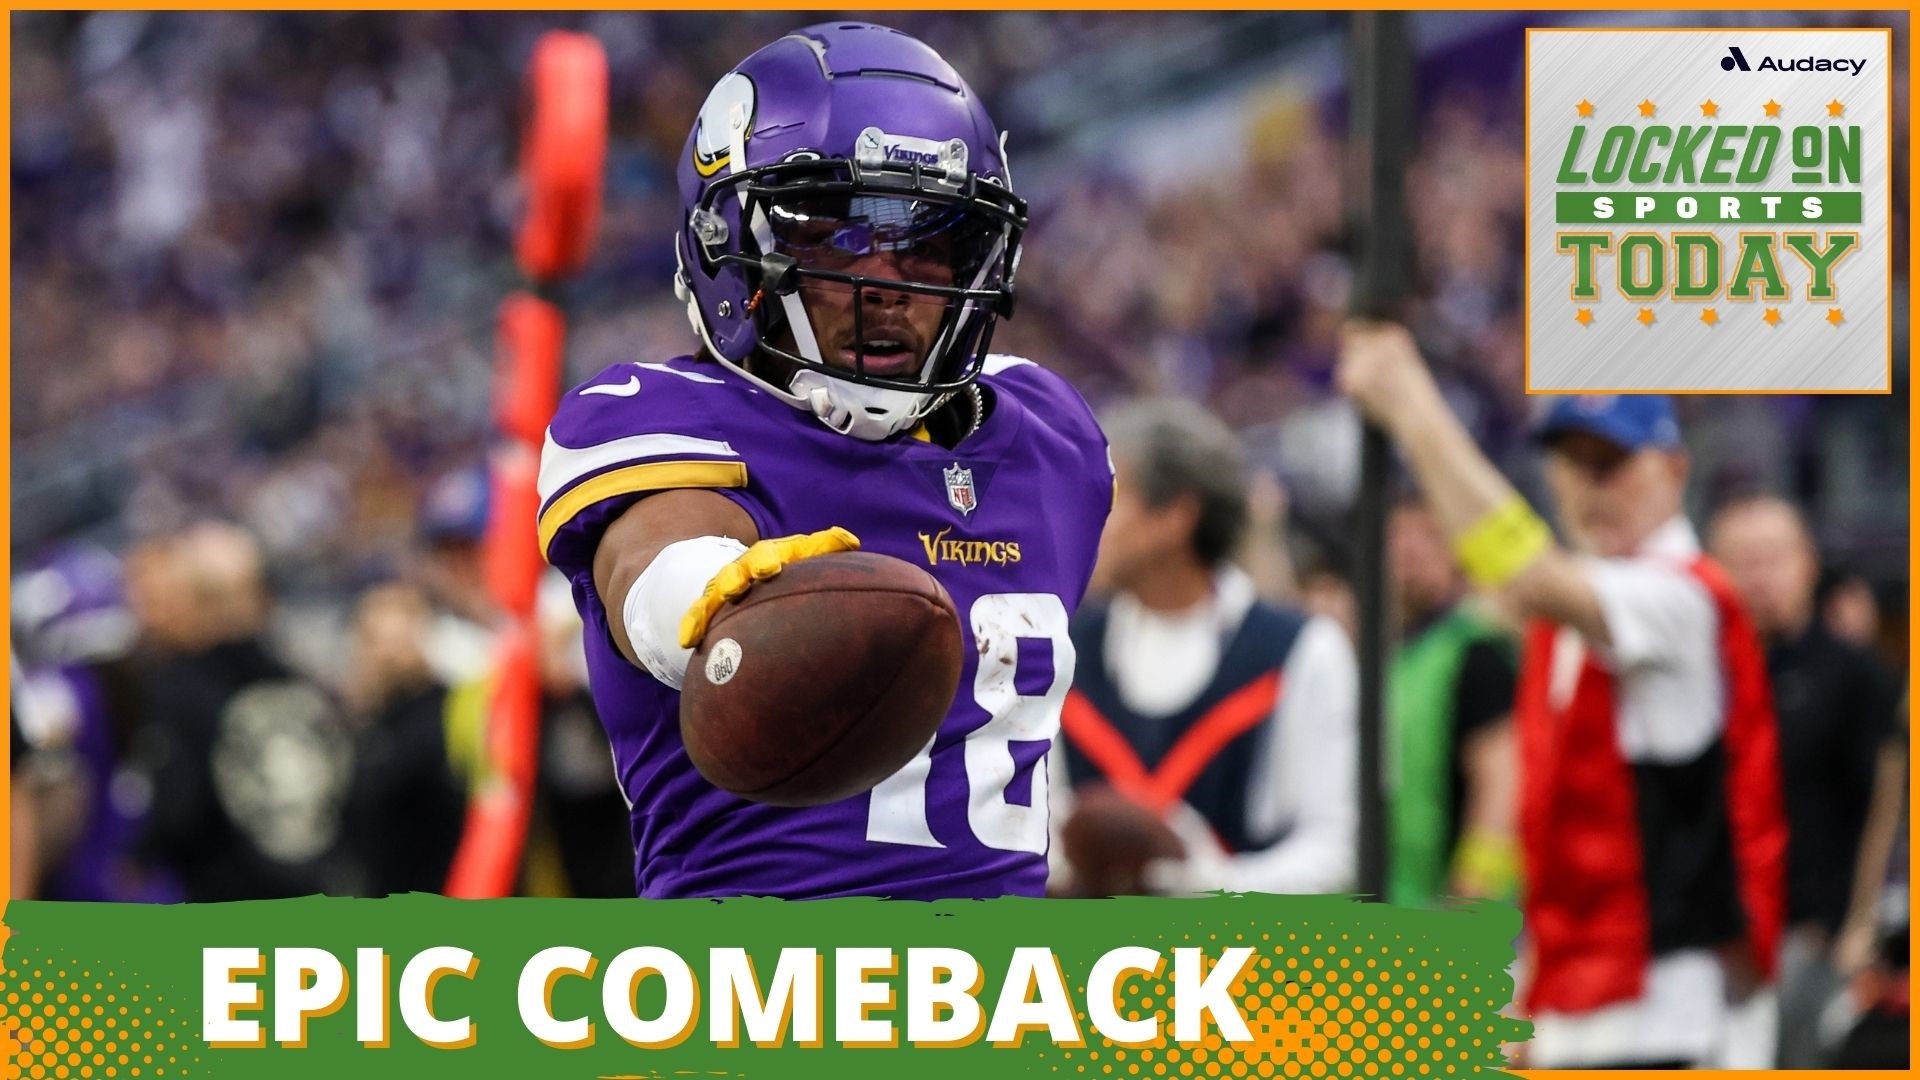 Discussing the day's top sports stories from an unbelievable comeback for the Minnesota Vikings to the Jaguars remaining in the NFL playoff picture.